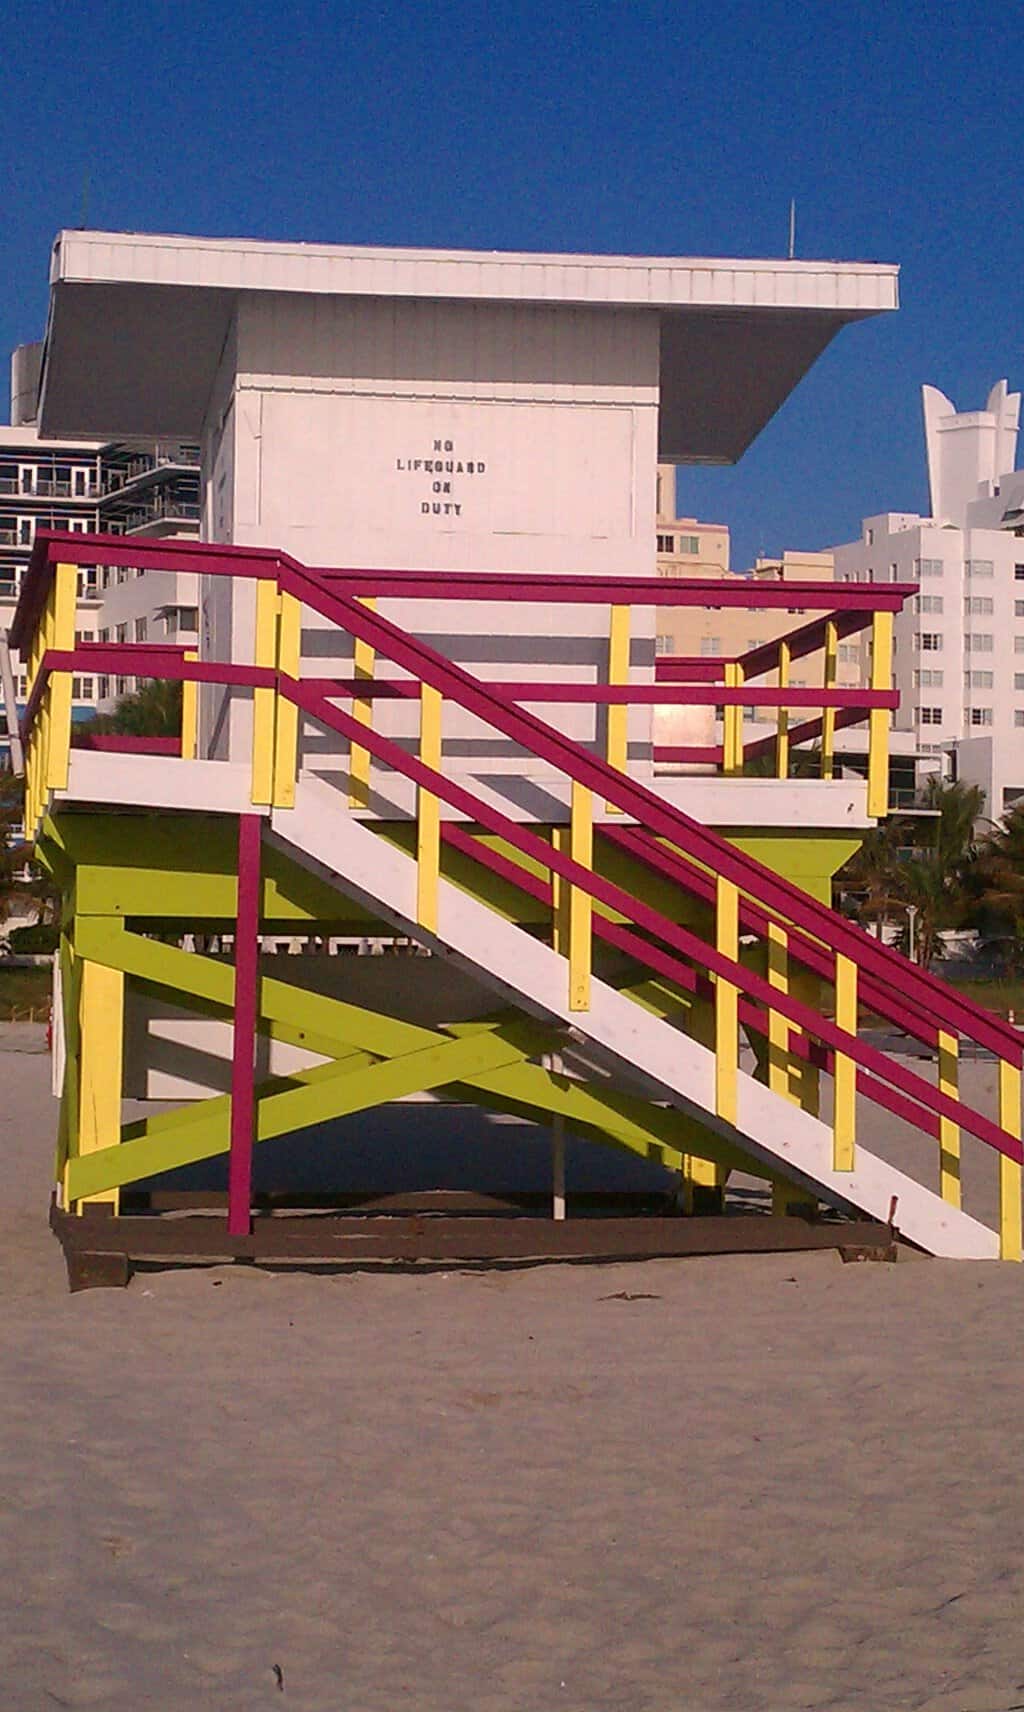 The lifeguard stand is decorated really cute on South Beach